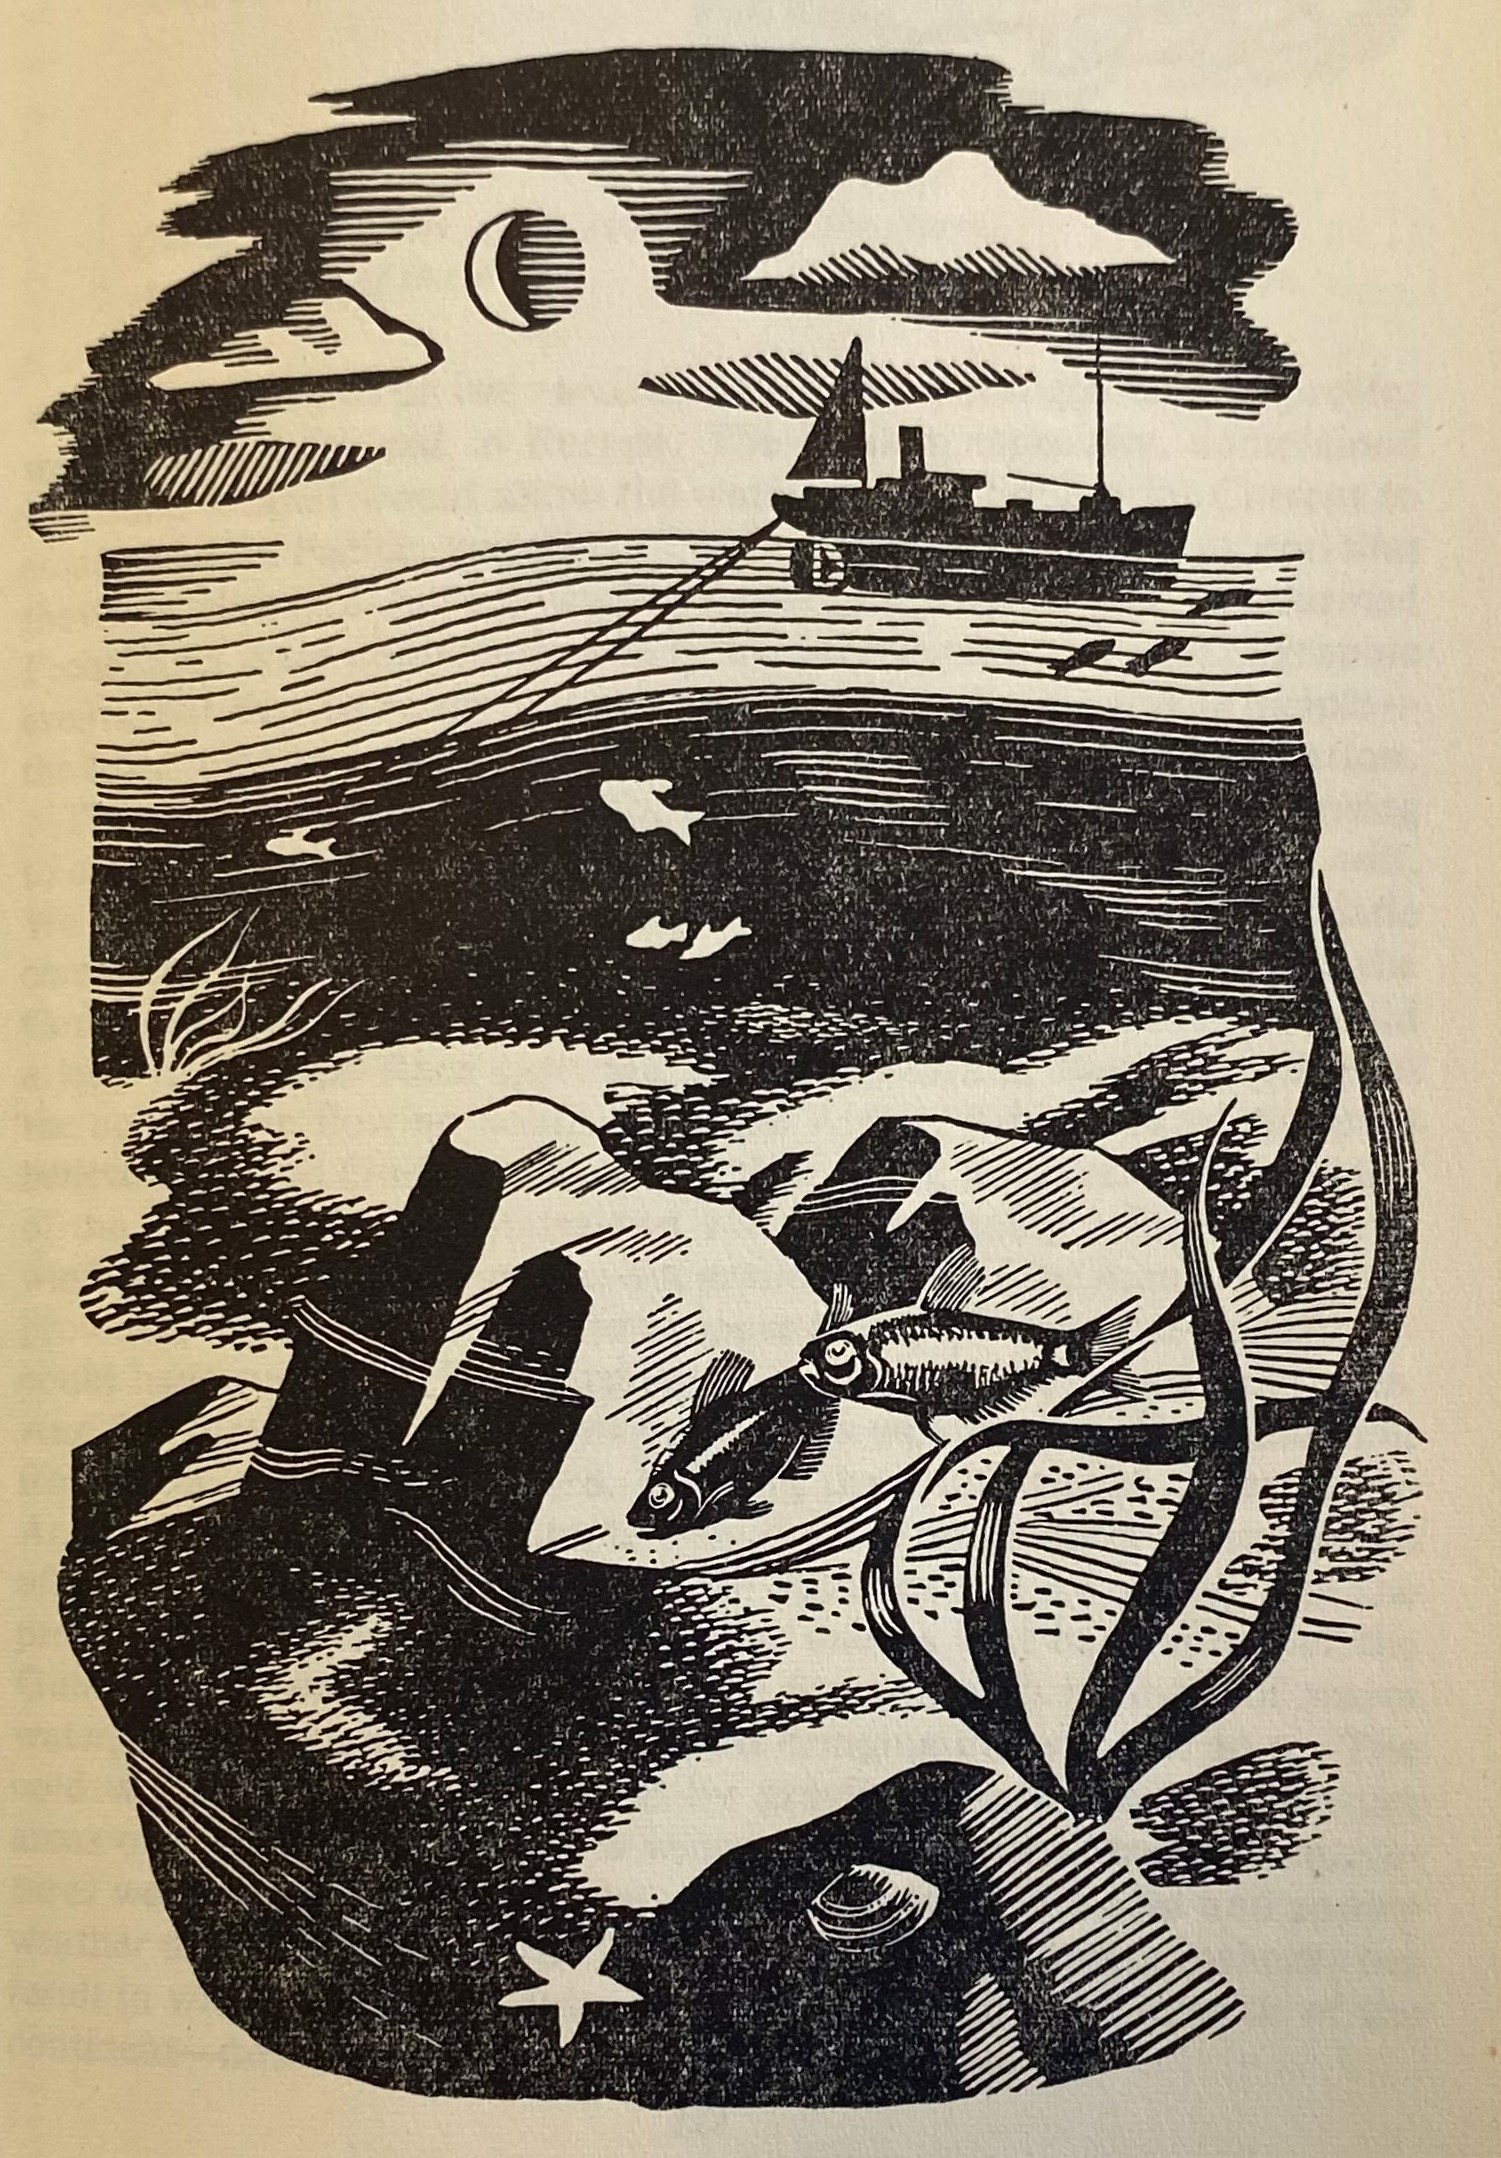 Black and White plate from Rachel Carson's book The Sea Around Us